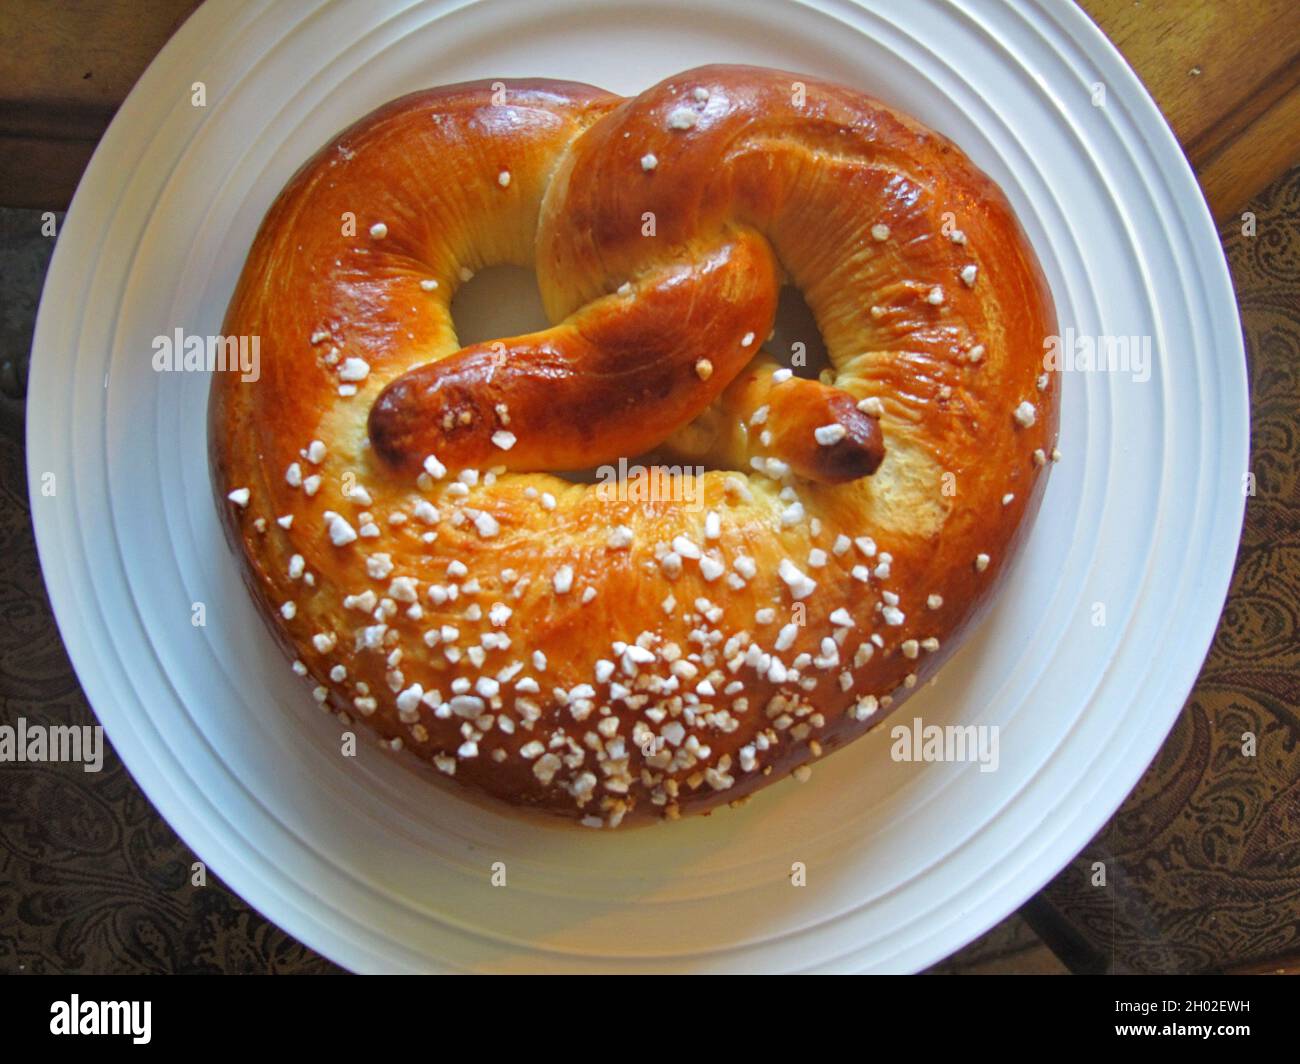 Loaf of bread called PRETZEL or BREZEL typical food of Austria Stock Photo